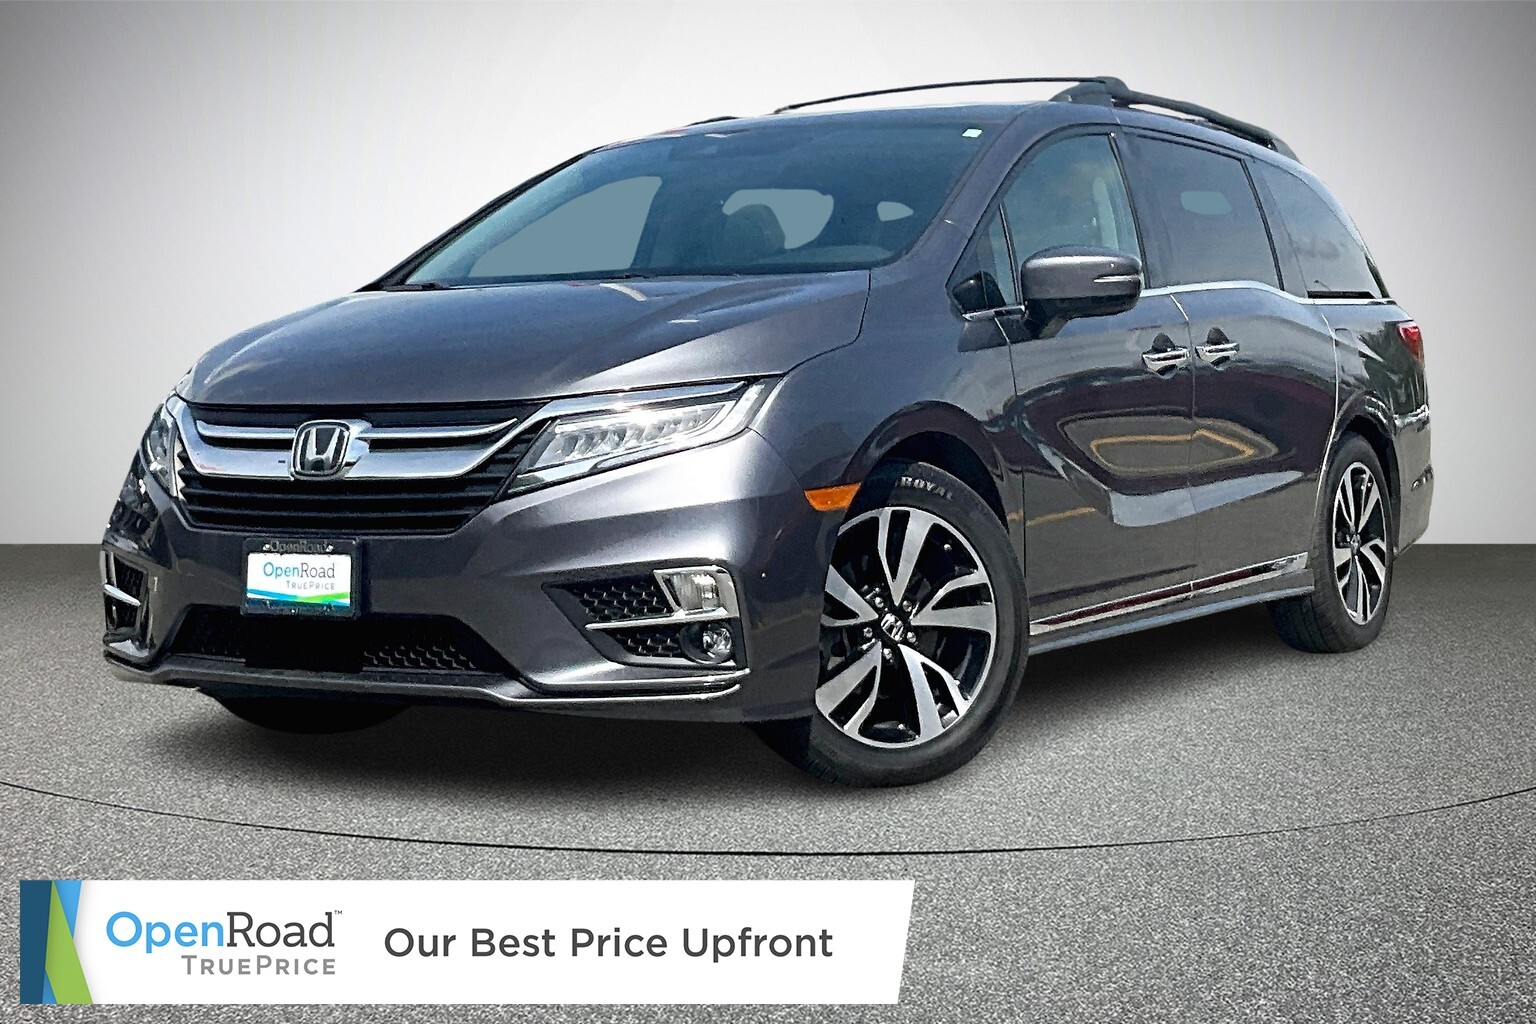 2018 Honda Odyssey Touring Auto - For as little as $310.49 bi-weekly!